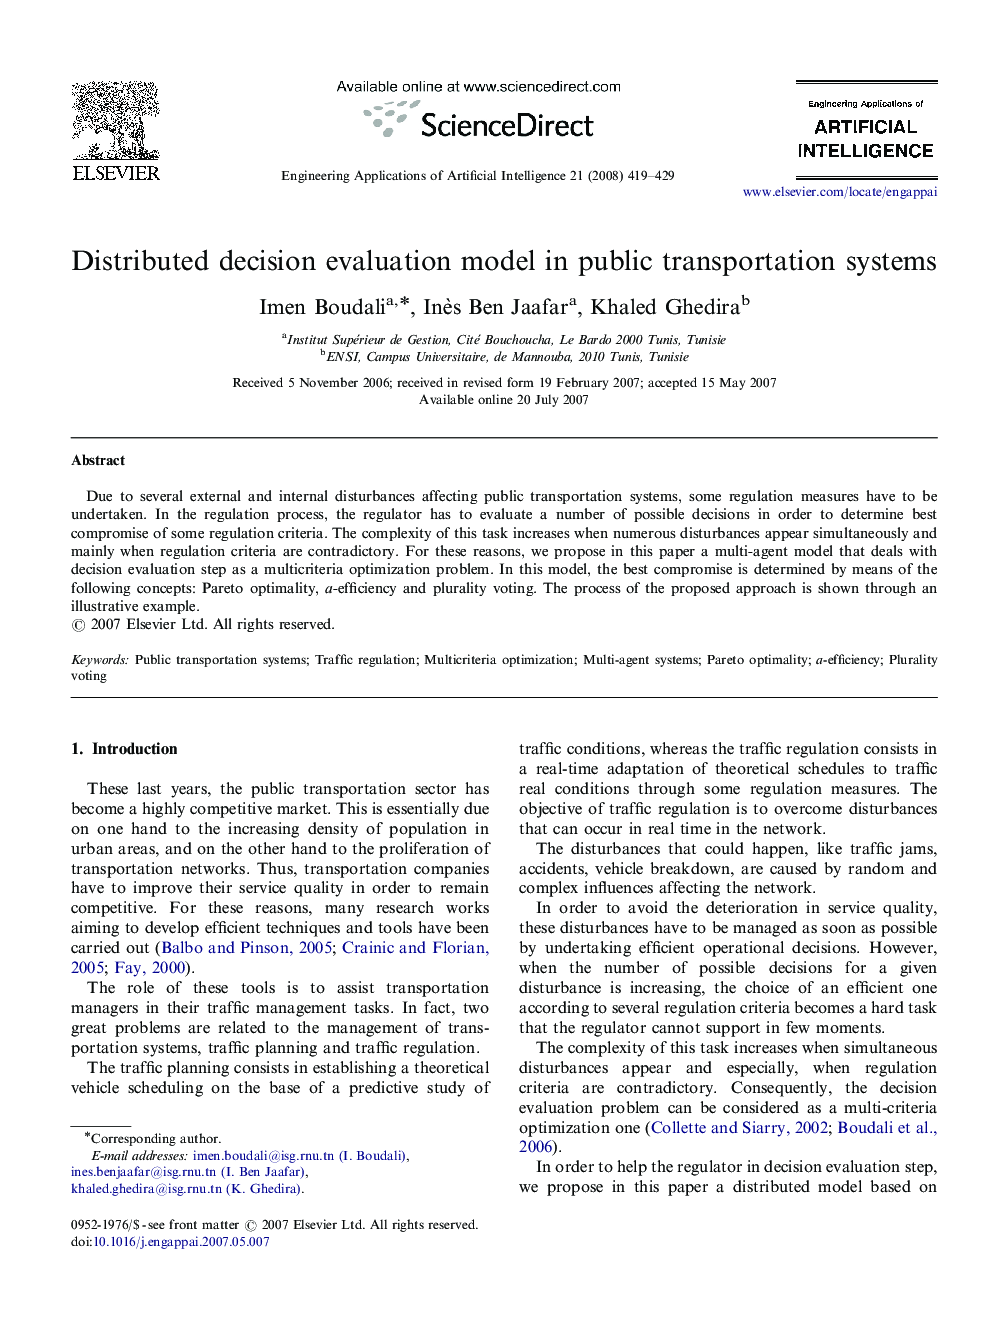 Distributed decision evaluation model in public transportation systems